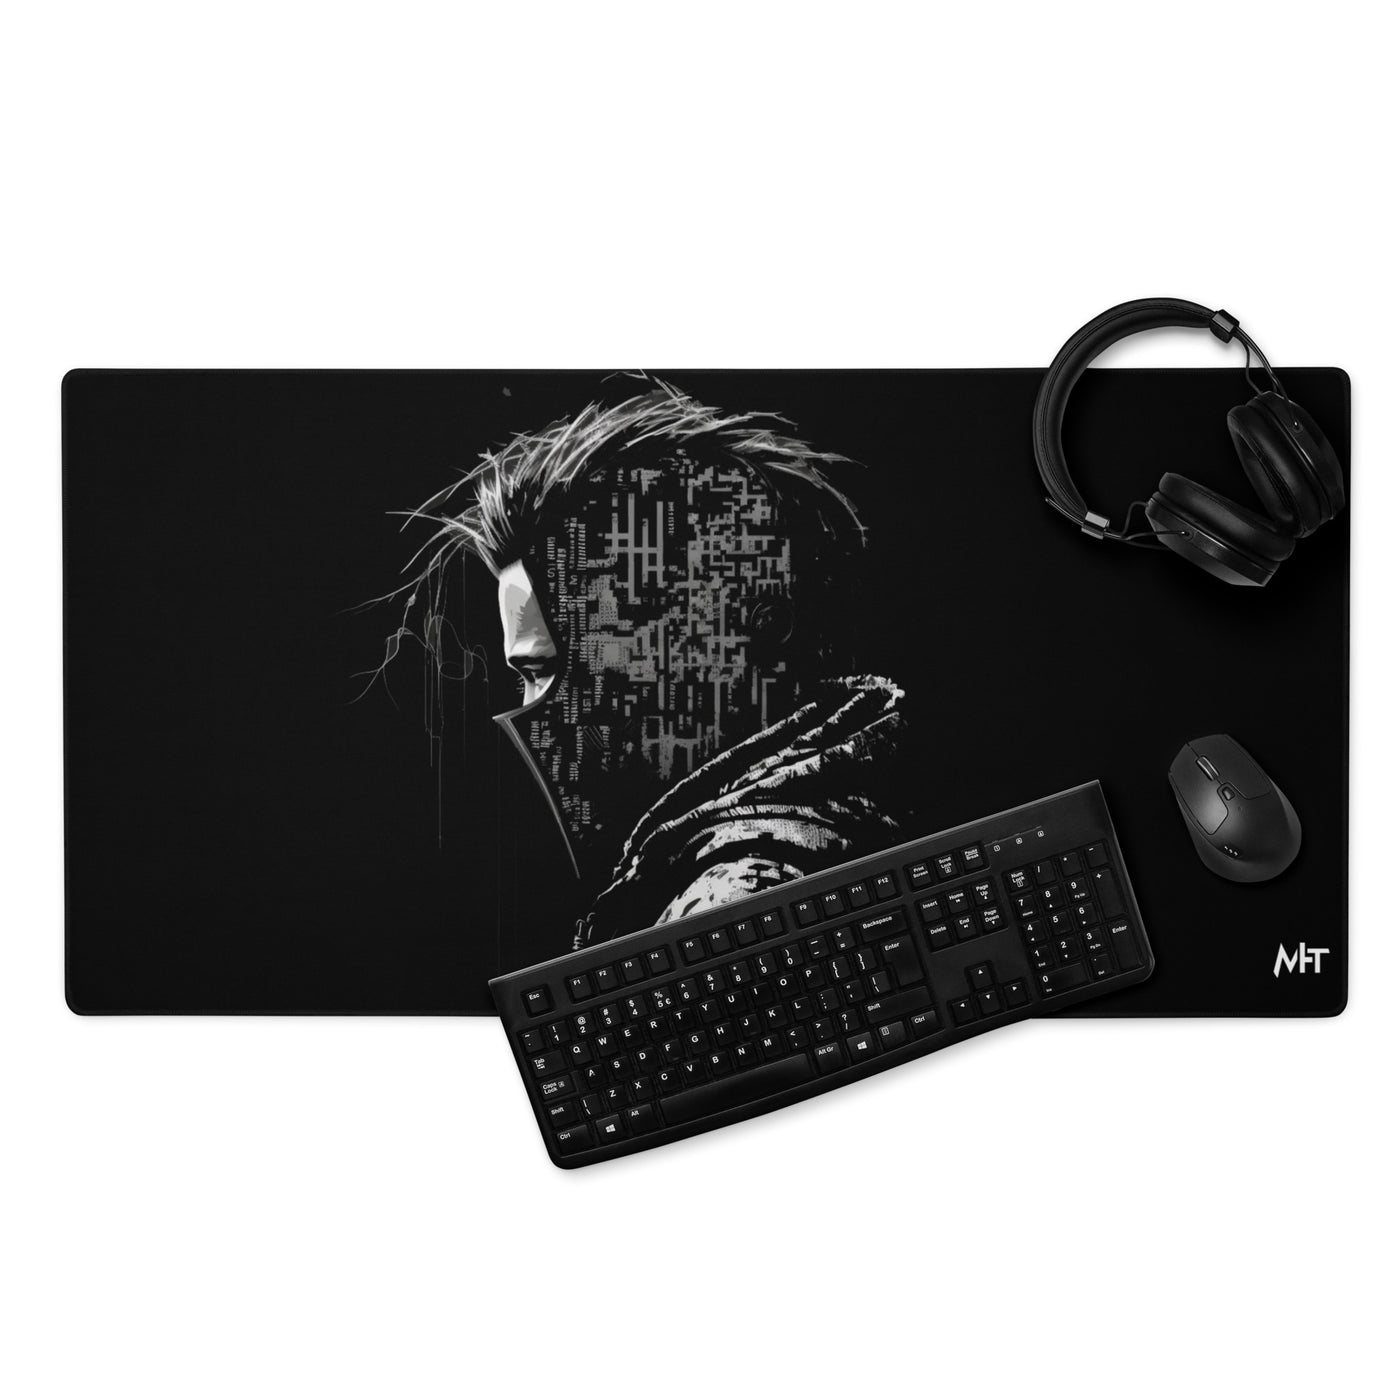 Cyberware assassin v29 - Gaming mouse pad